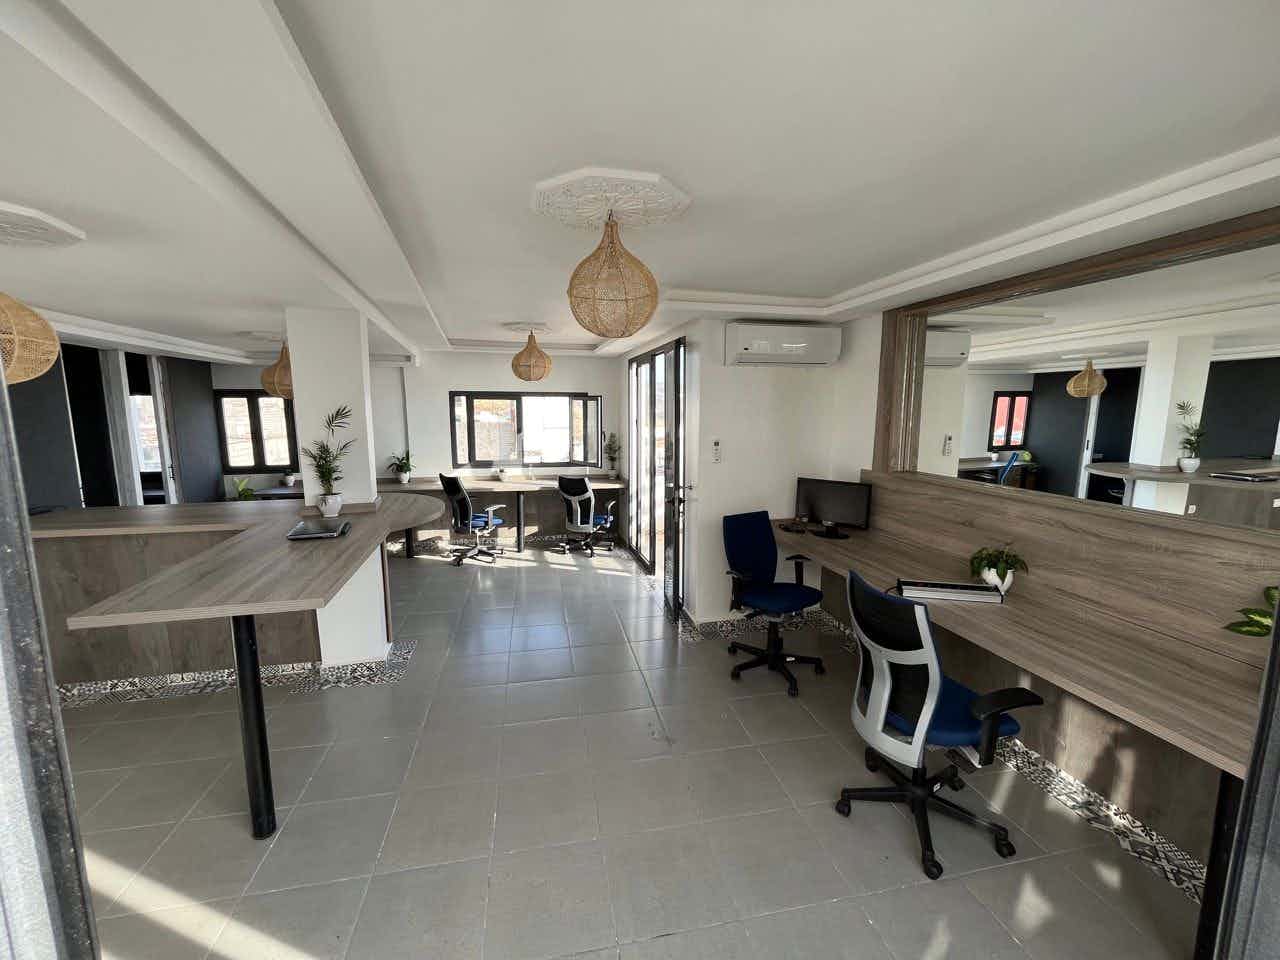 Coworking space taghazout